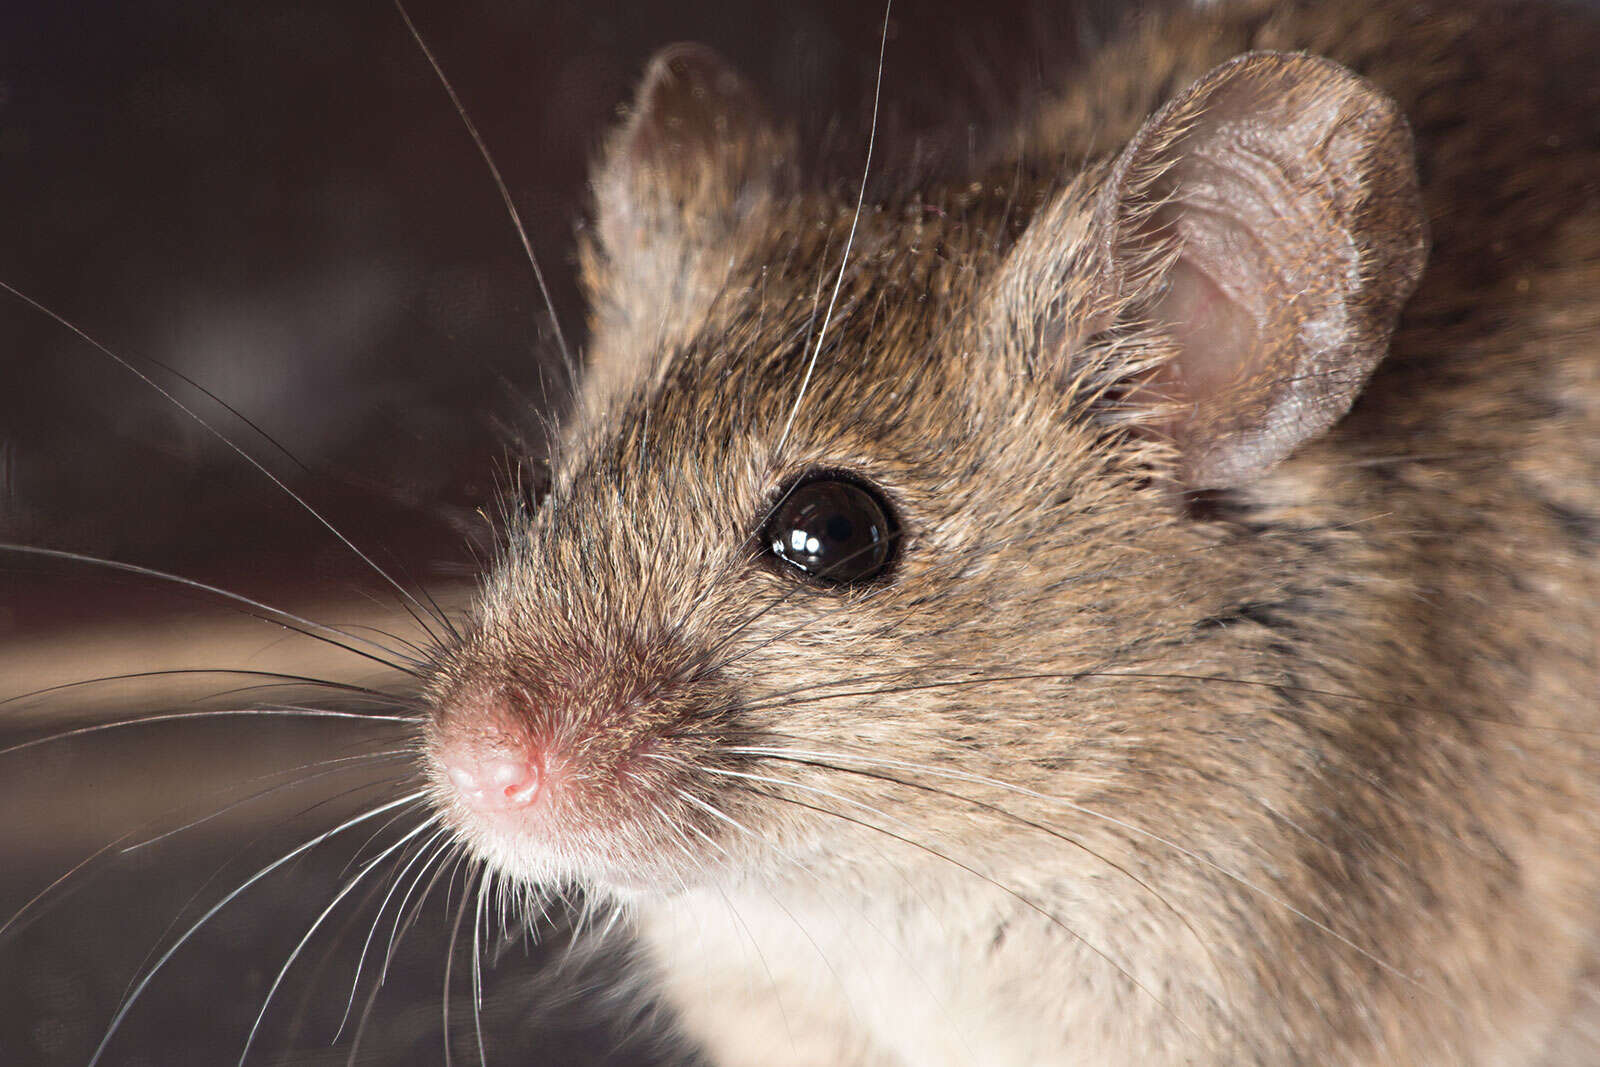 Image of Old World Mice and Pygmy Mice